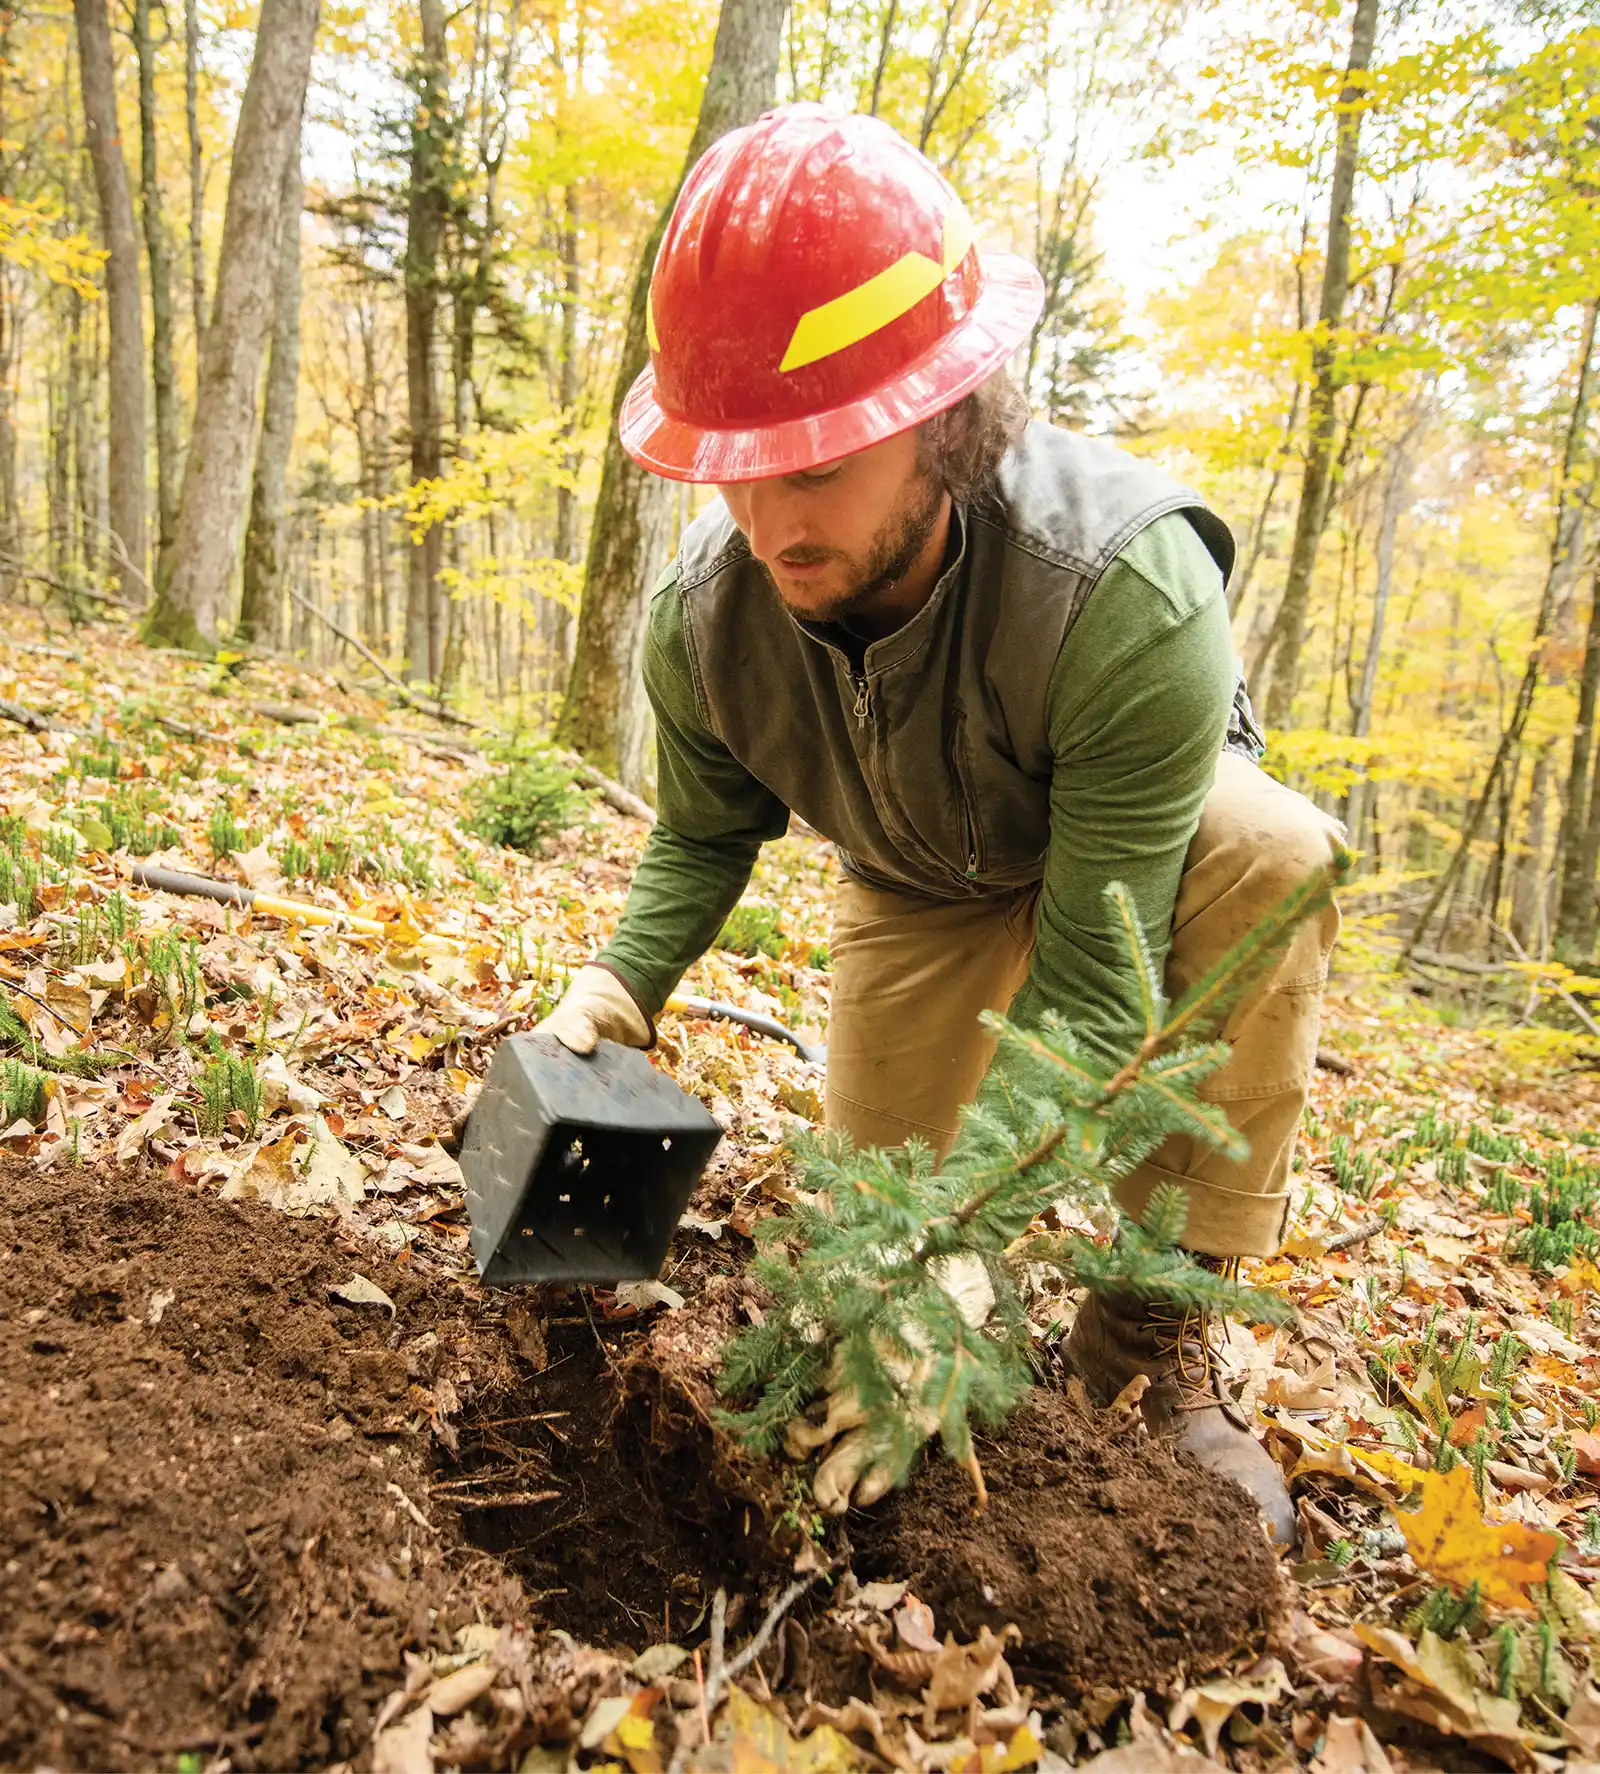 Man in red helmet and hiking gear, planting tree in forest